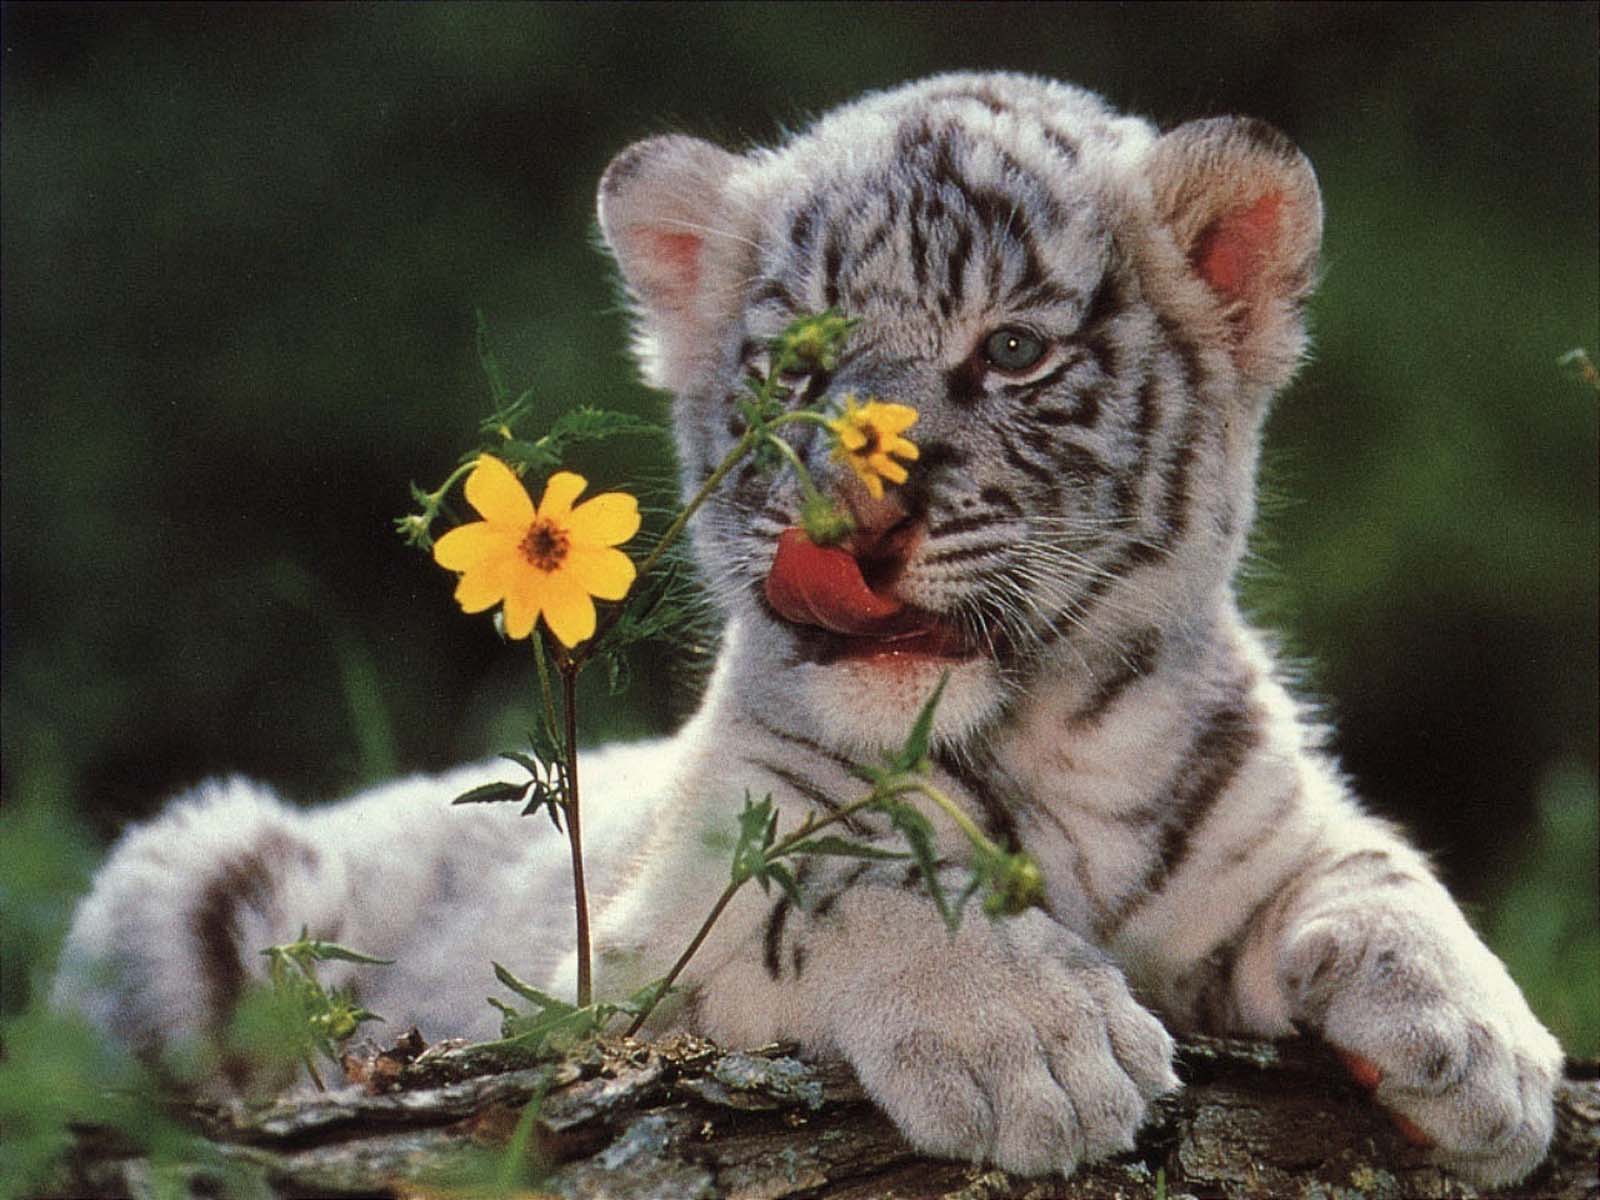 Baby White Tigers Wallpapers - 2013 Backgrounds